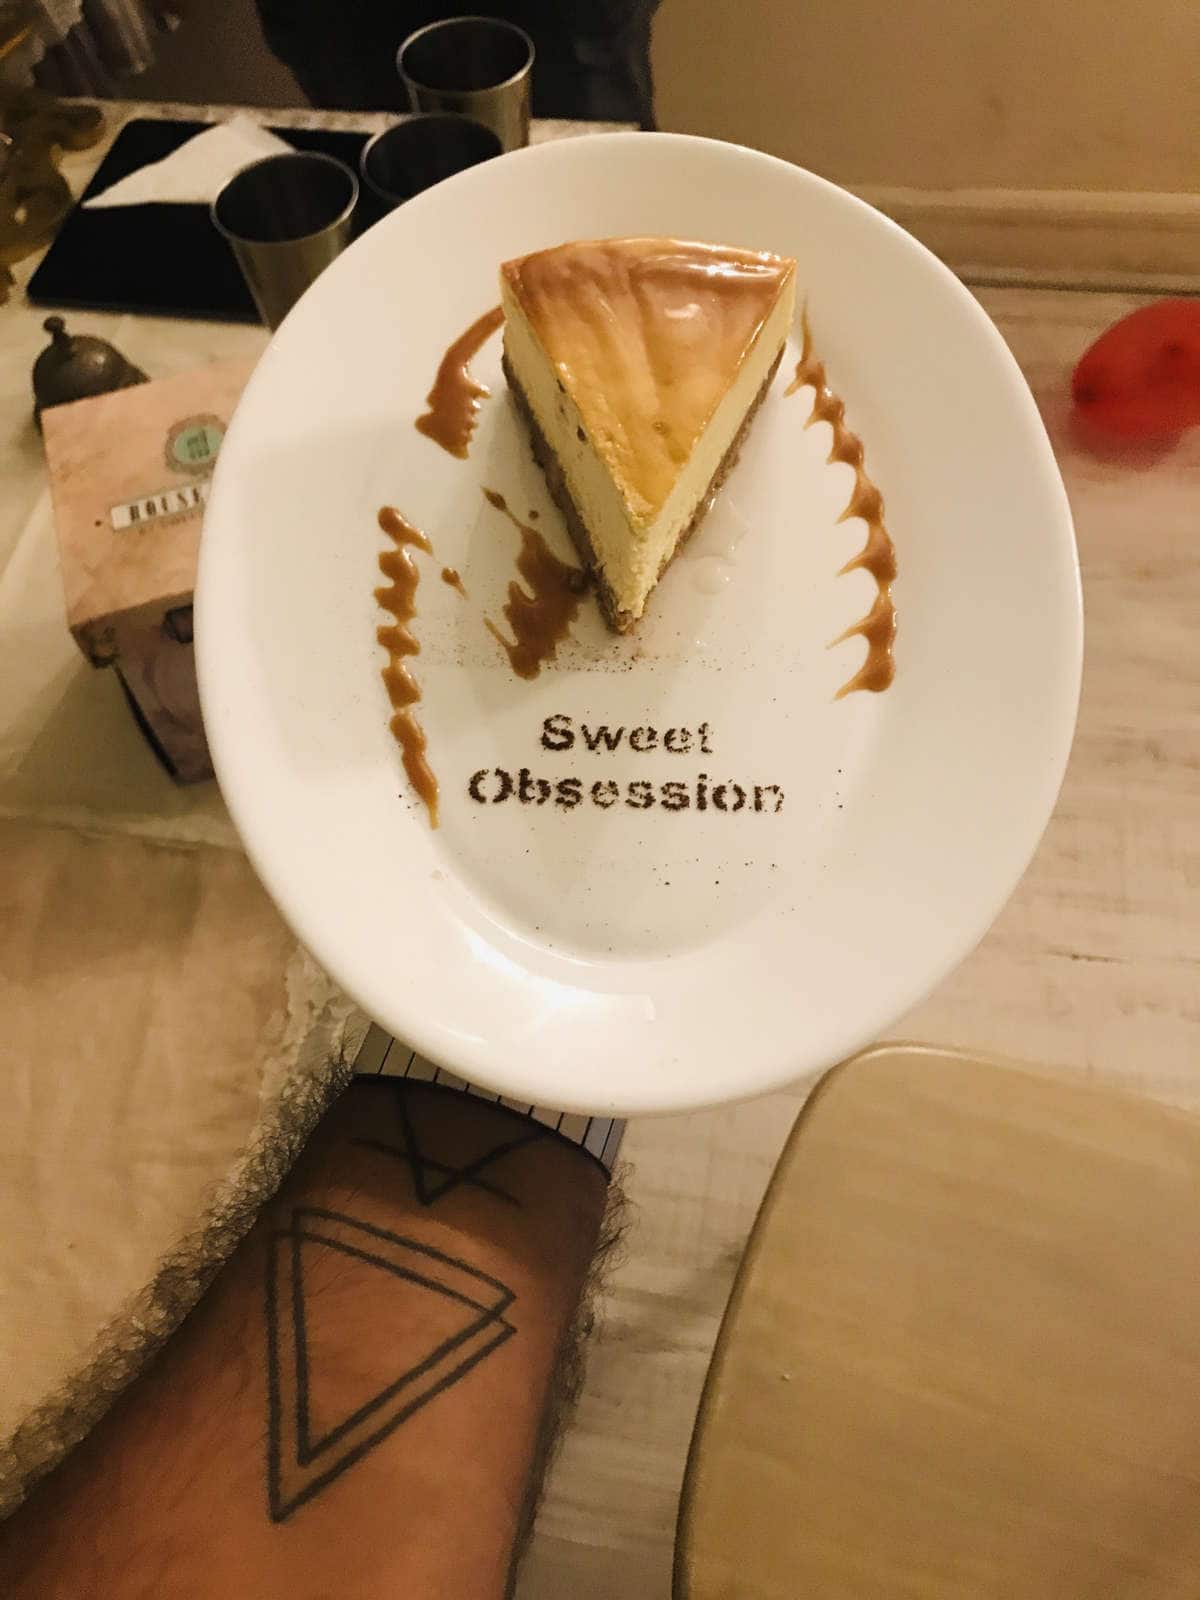 Sweet Obsession | Fresh Cakes Within 45 mins